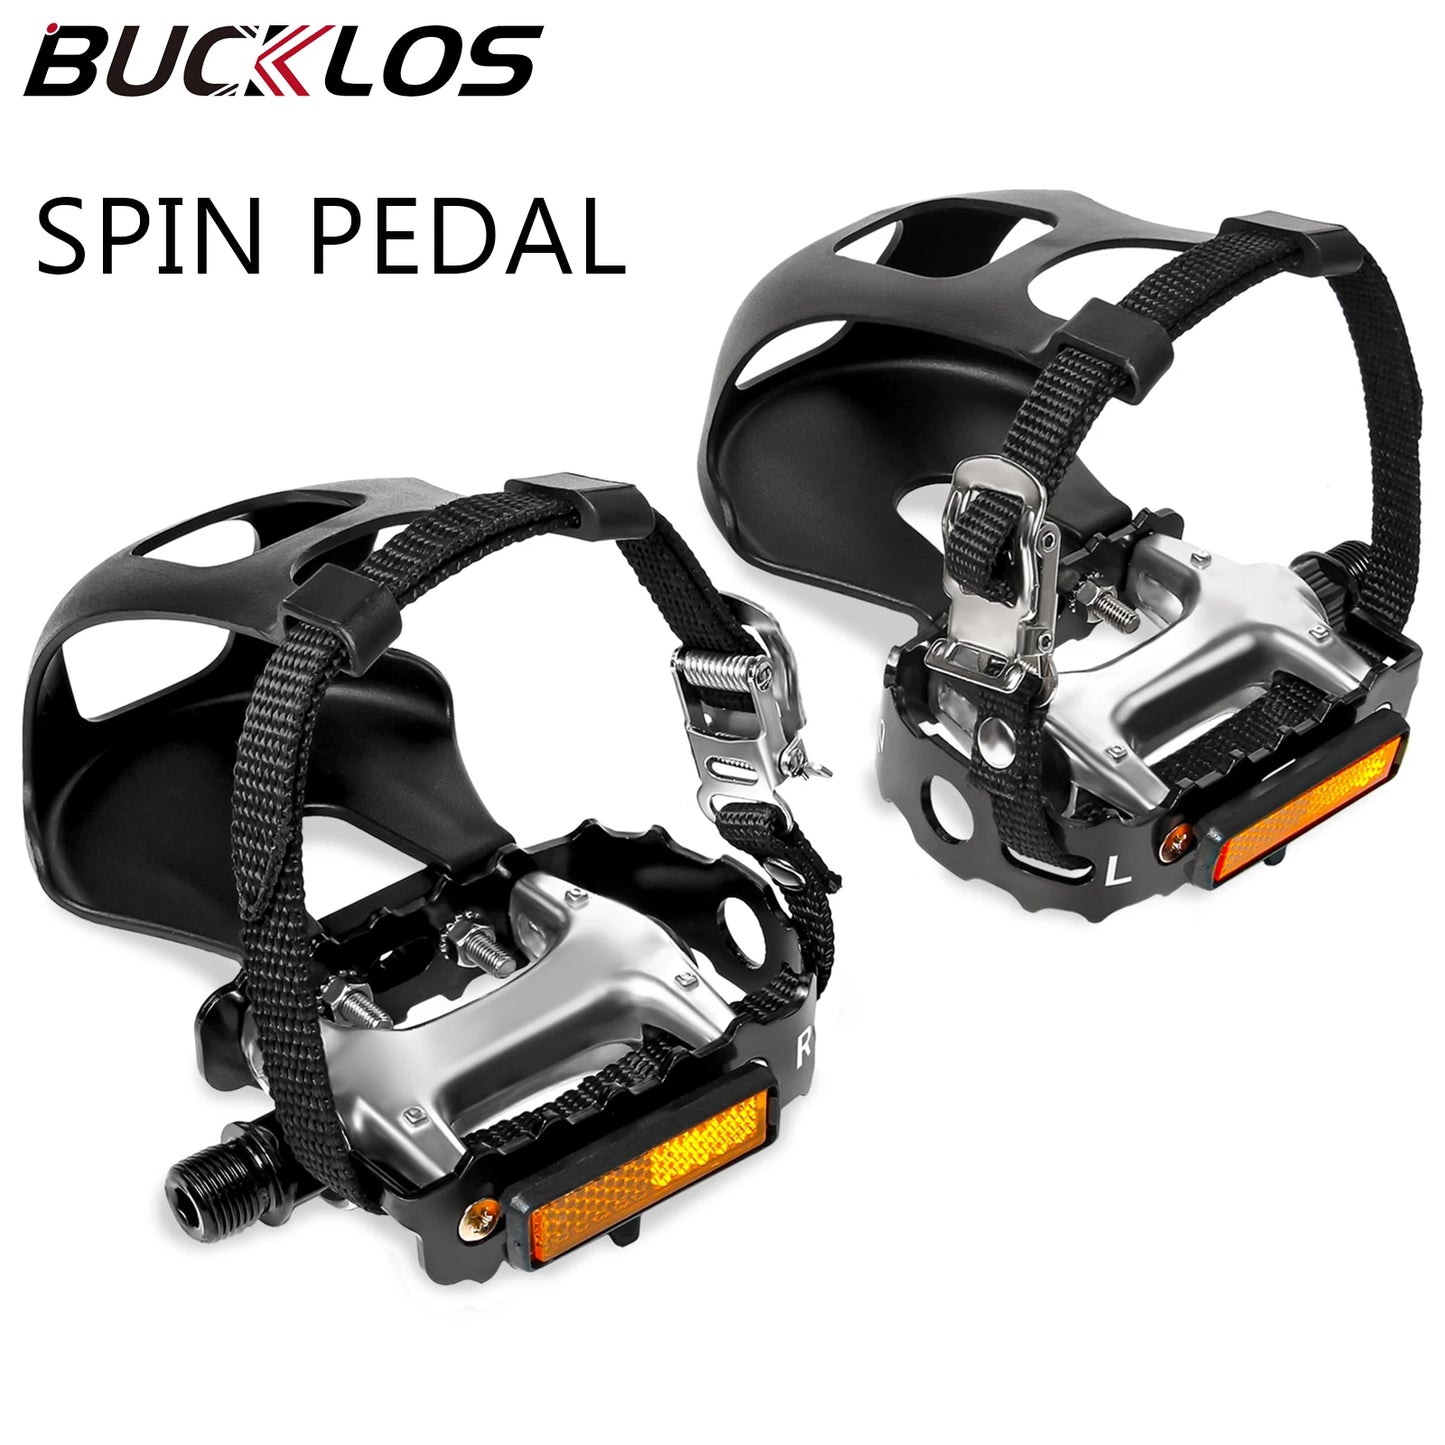 BUCKLOS Bicycle Spin Pedal DU Bearing Road Mountain Bike Top Clip Pedal Aluminum Alloy Cycling Exercise Pedals Bike Part